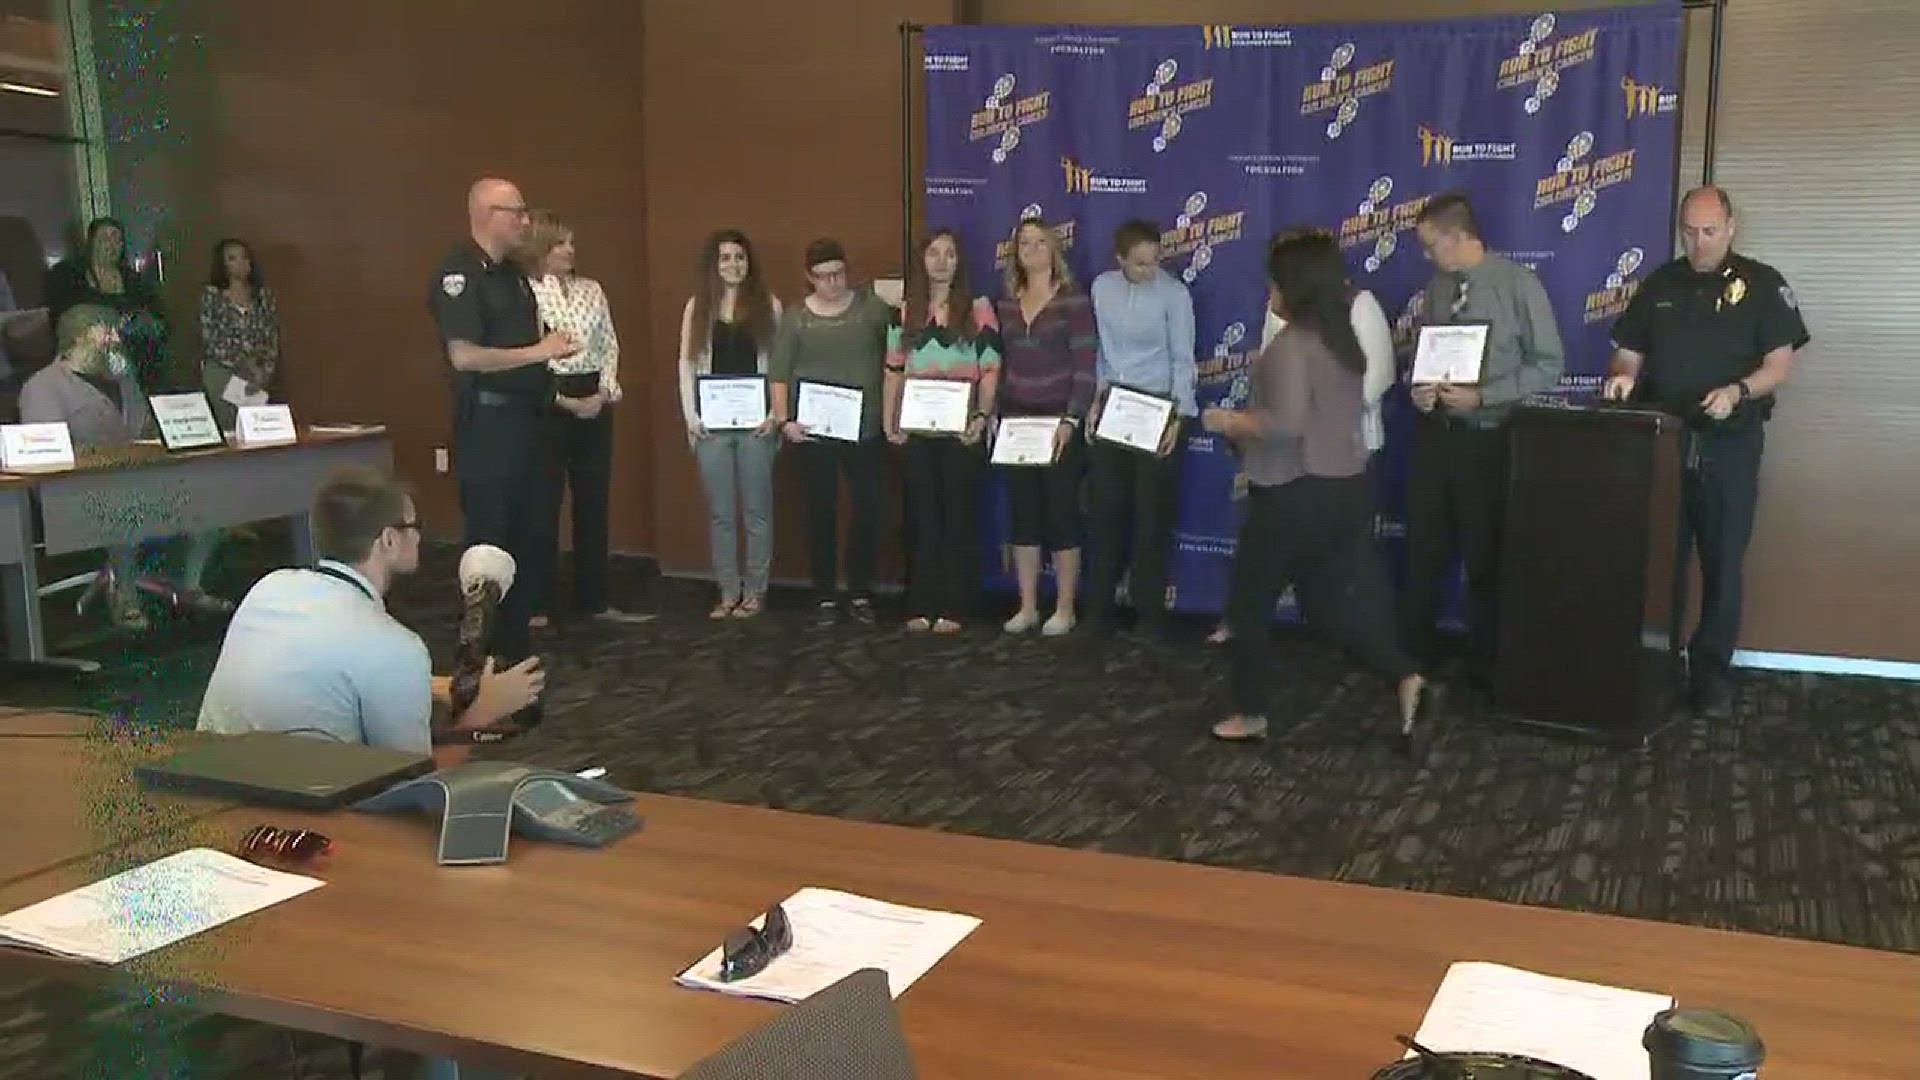 Students from Grand Canyon University’s Sports Medicine Club were honored for saving a man’s life.